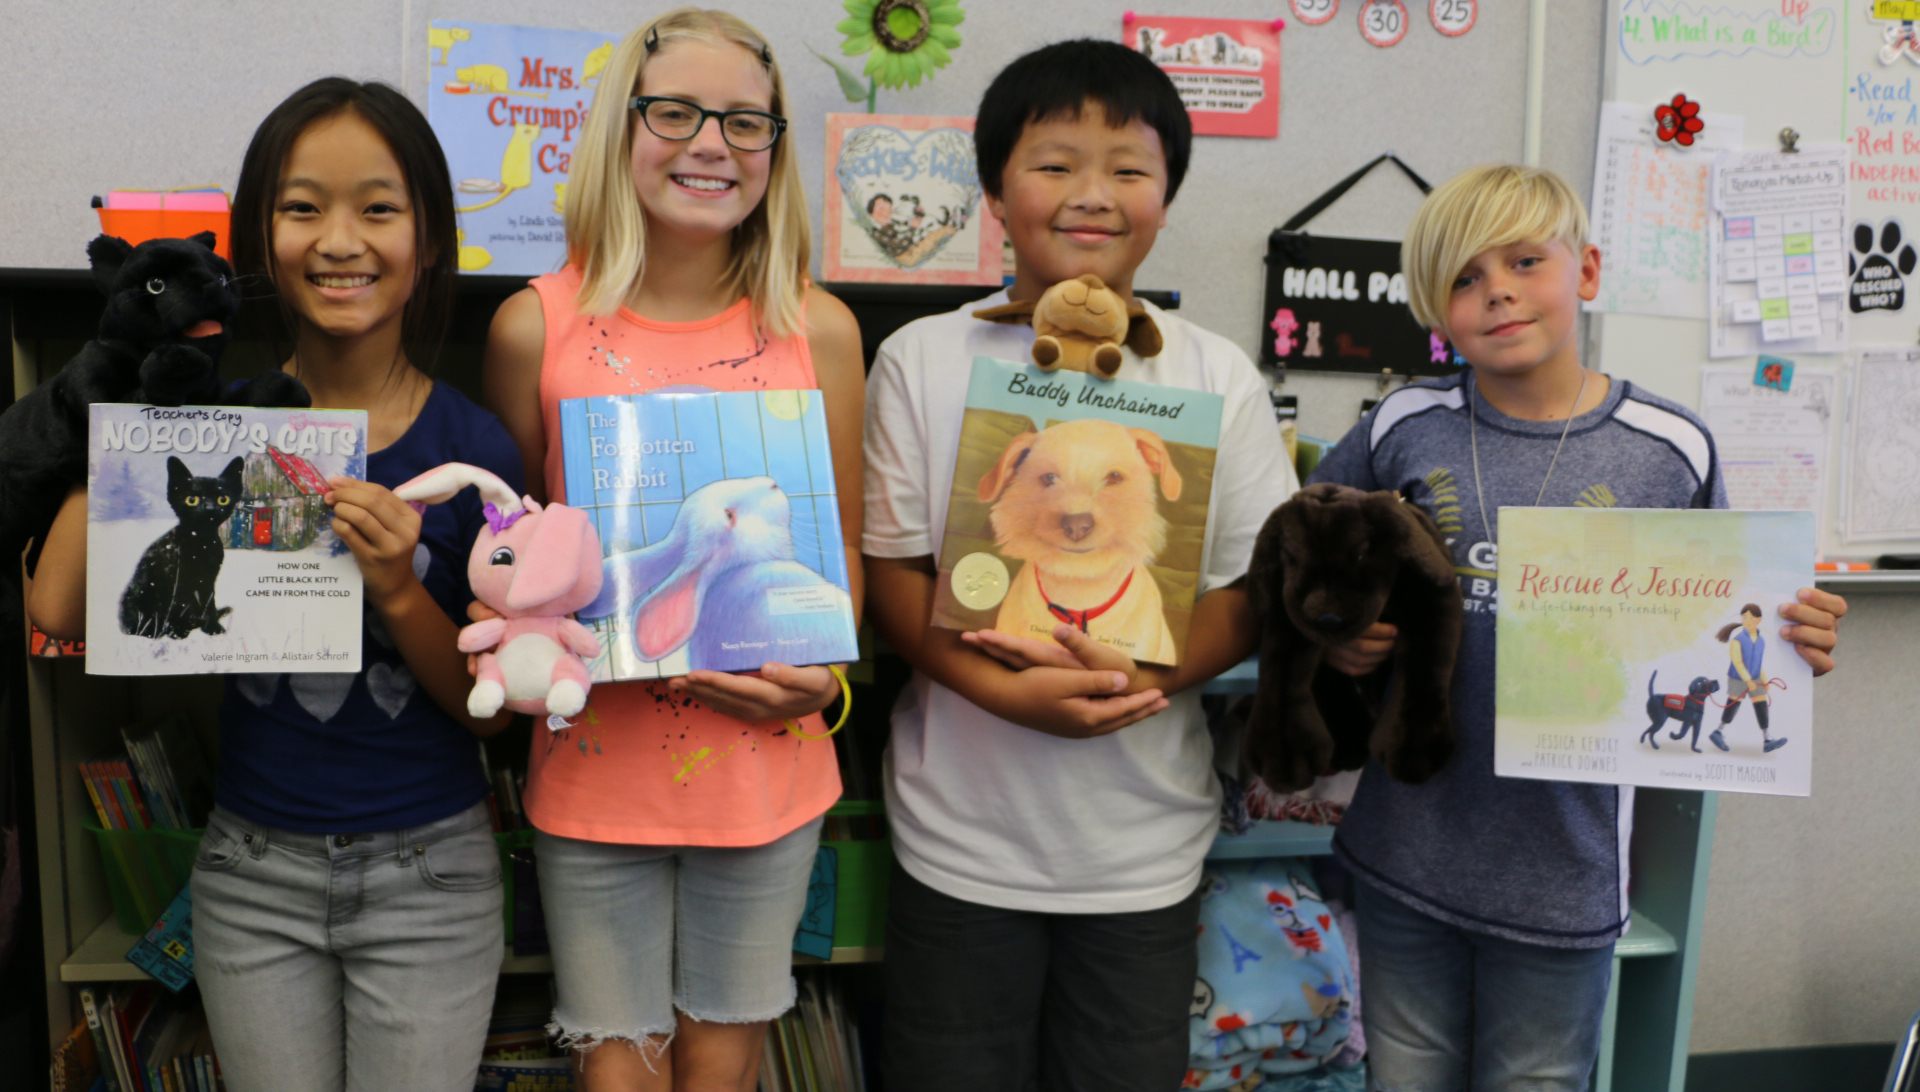 Students holding books and stuffed animals